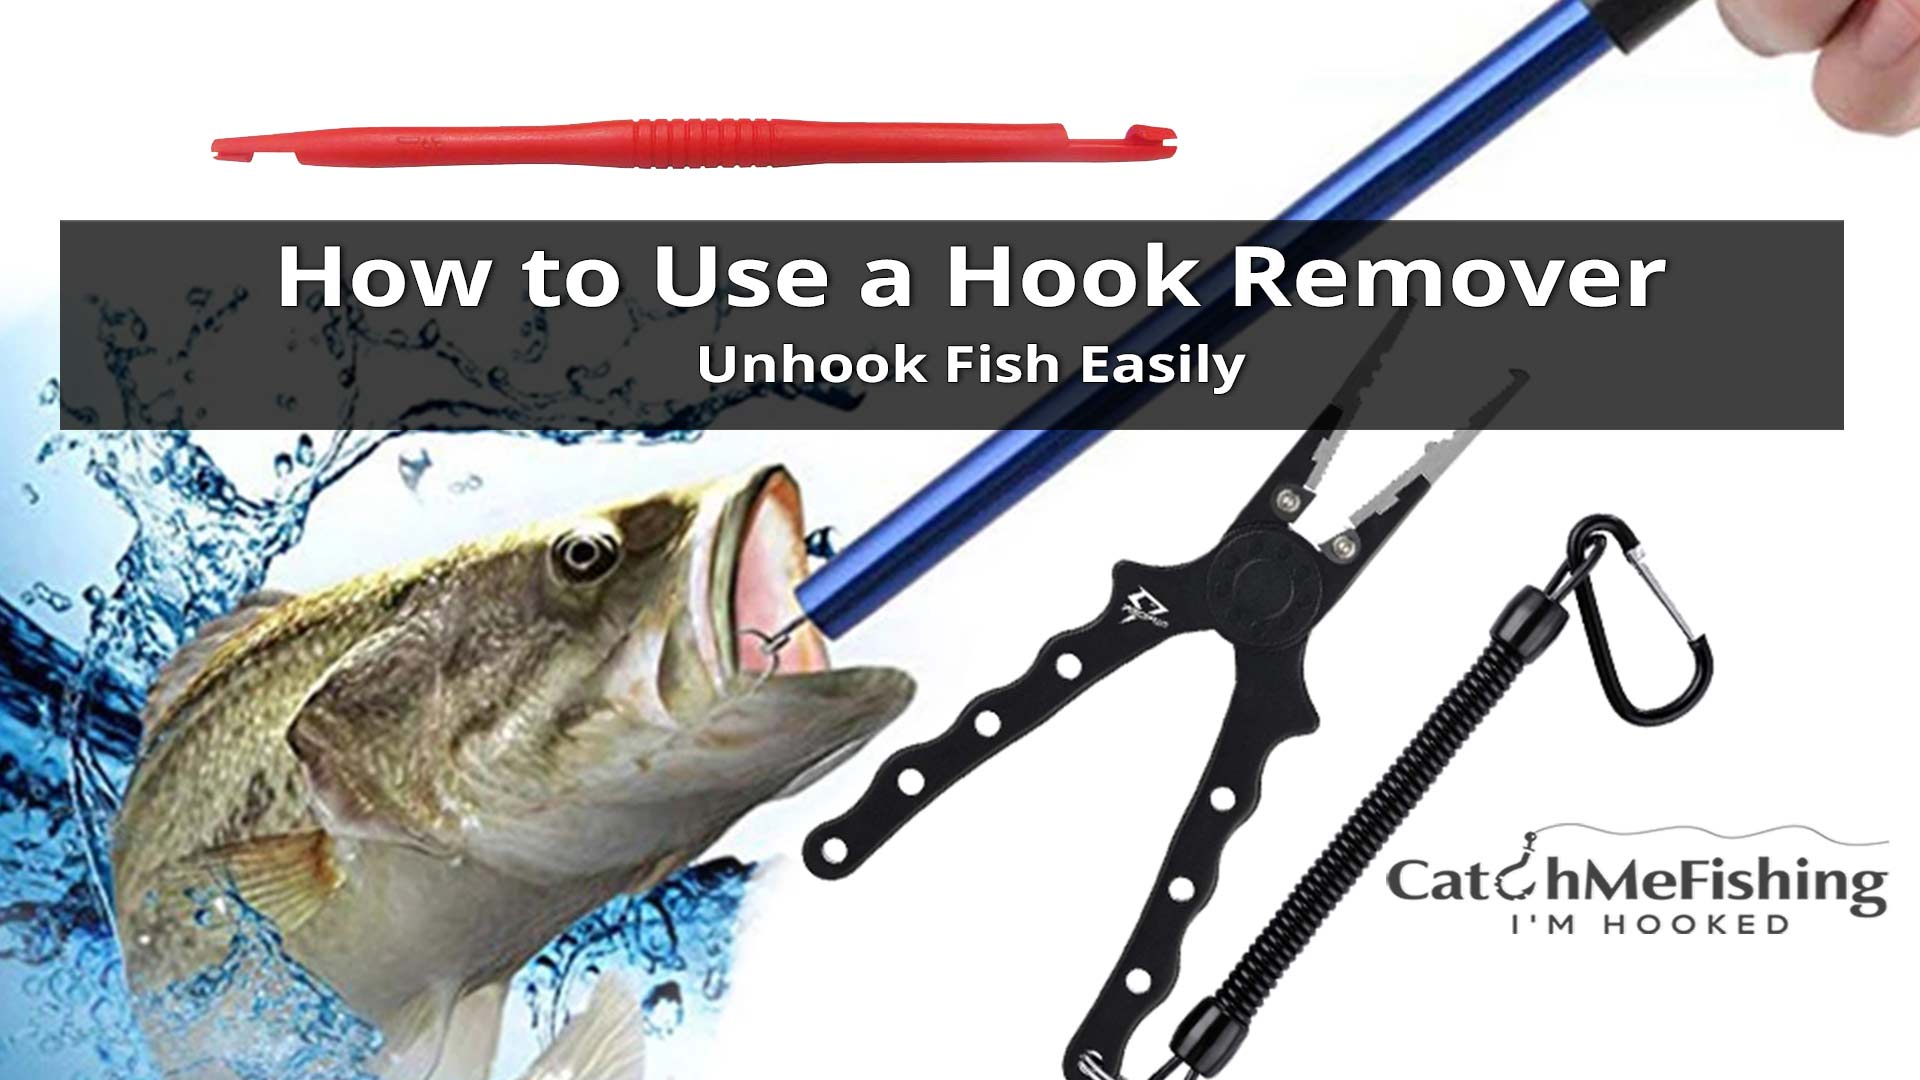 The LAST Hook Remover You'll Ever Buy! NEW Rainbow Shoot Out Fish Hook Remover 